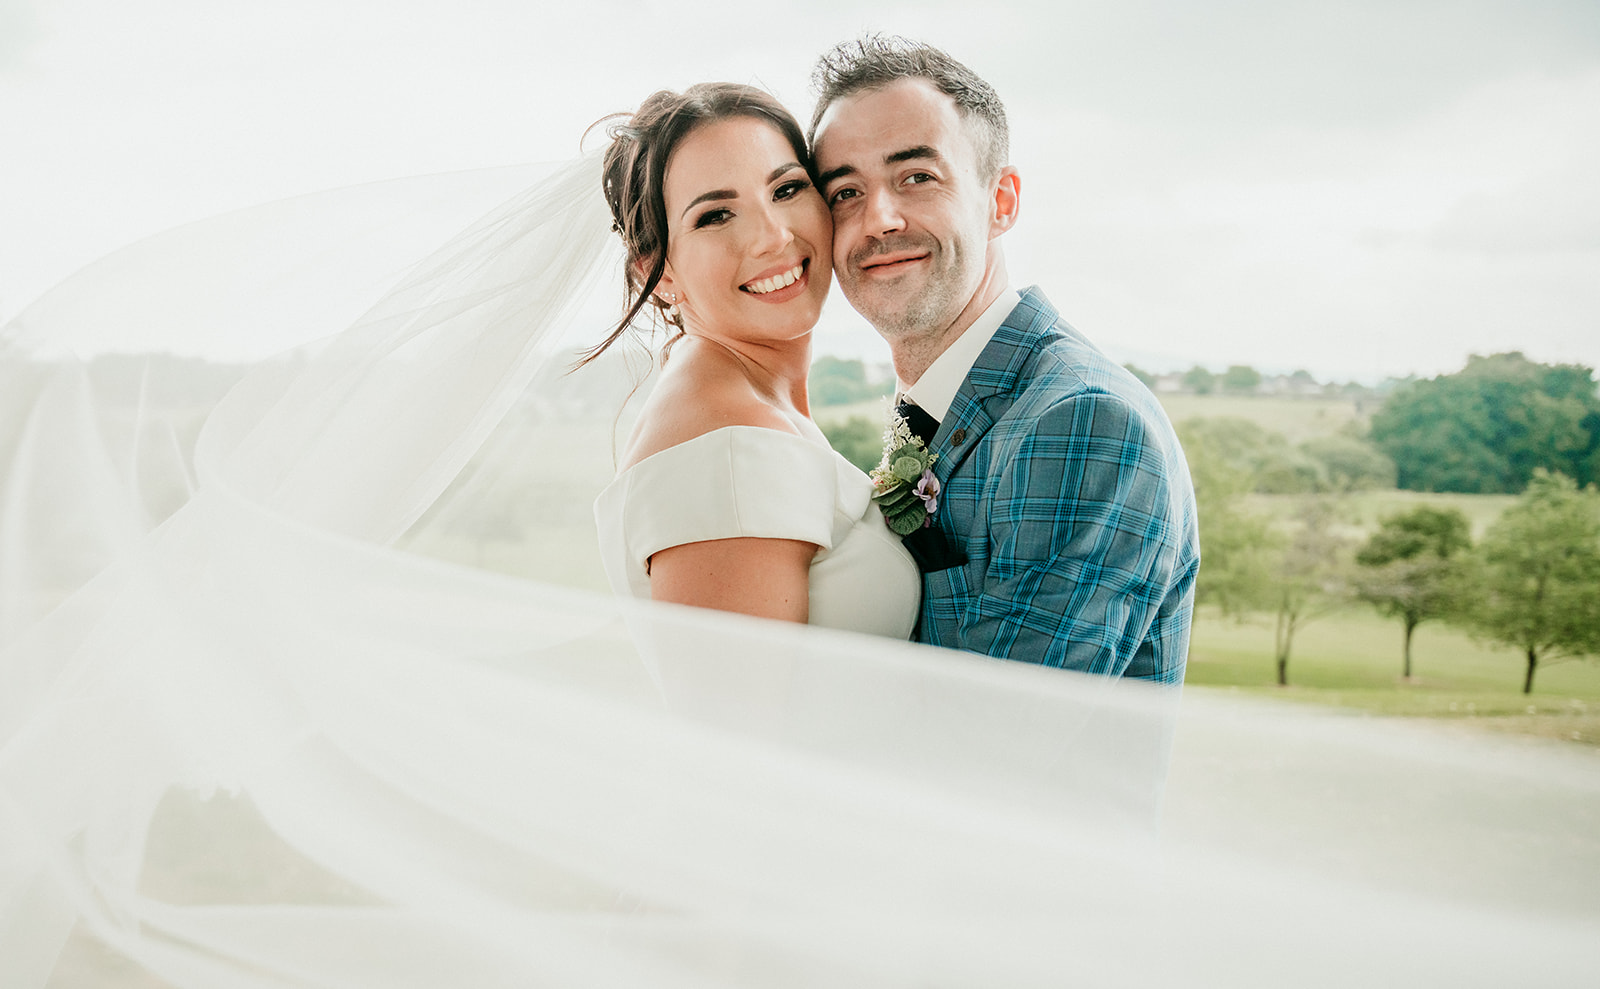 Naomi & Christy's wedding day at the roe park resort in Limavady